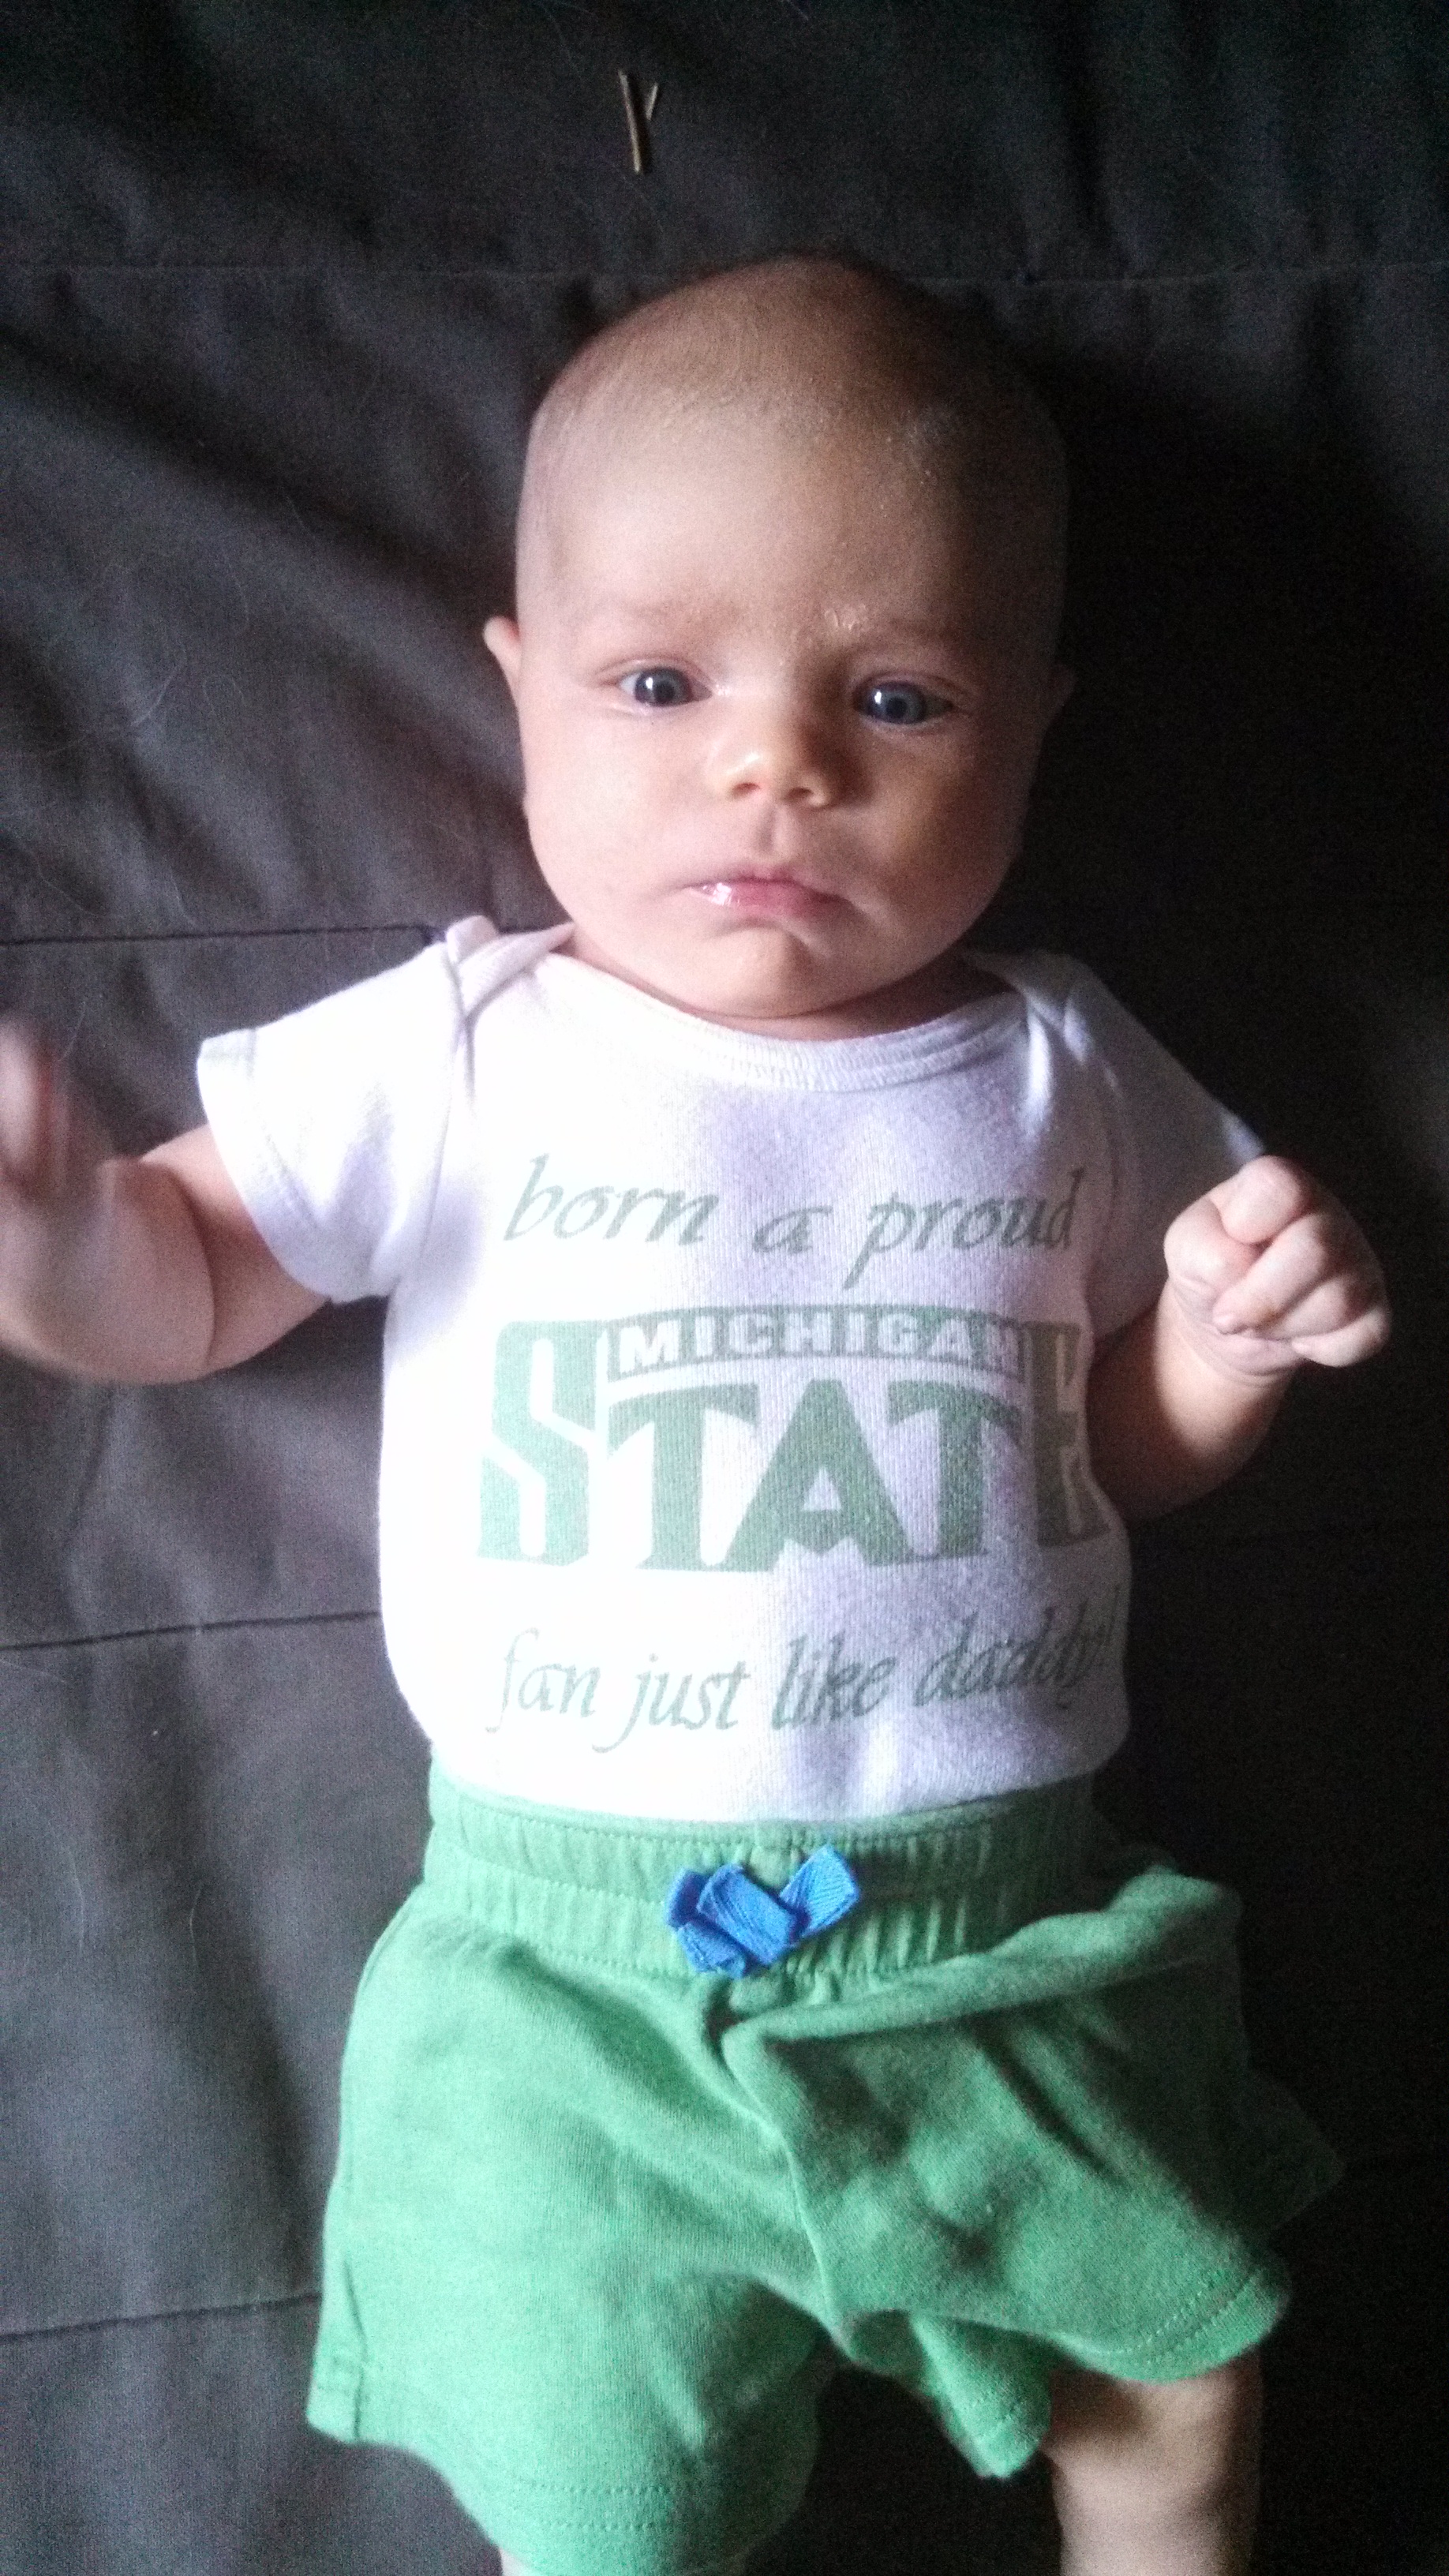 Don't worry, Duck fans: She has an Oregon onesie, too!